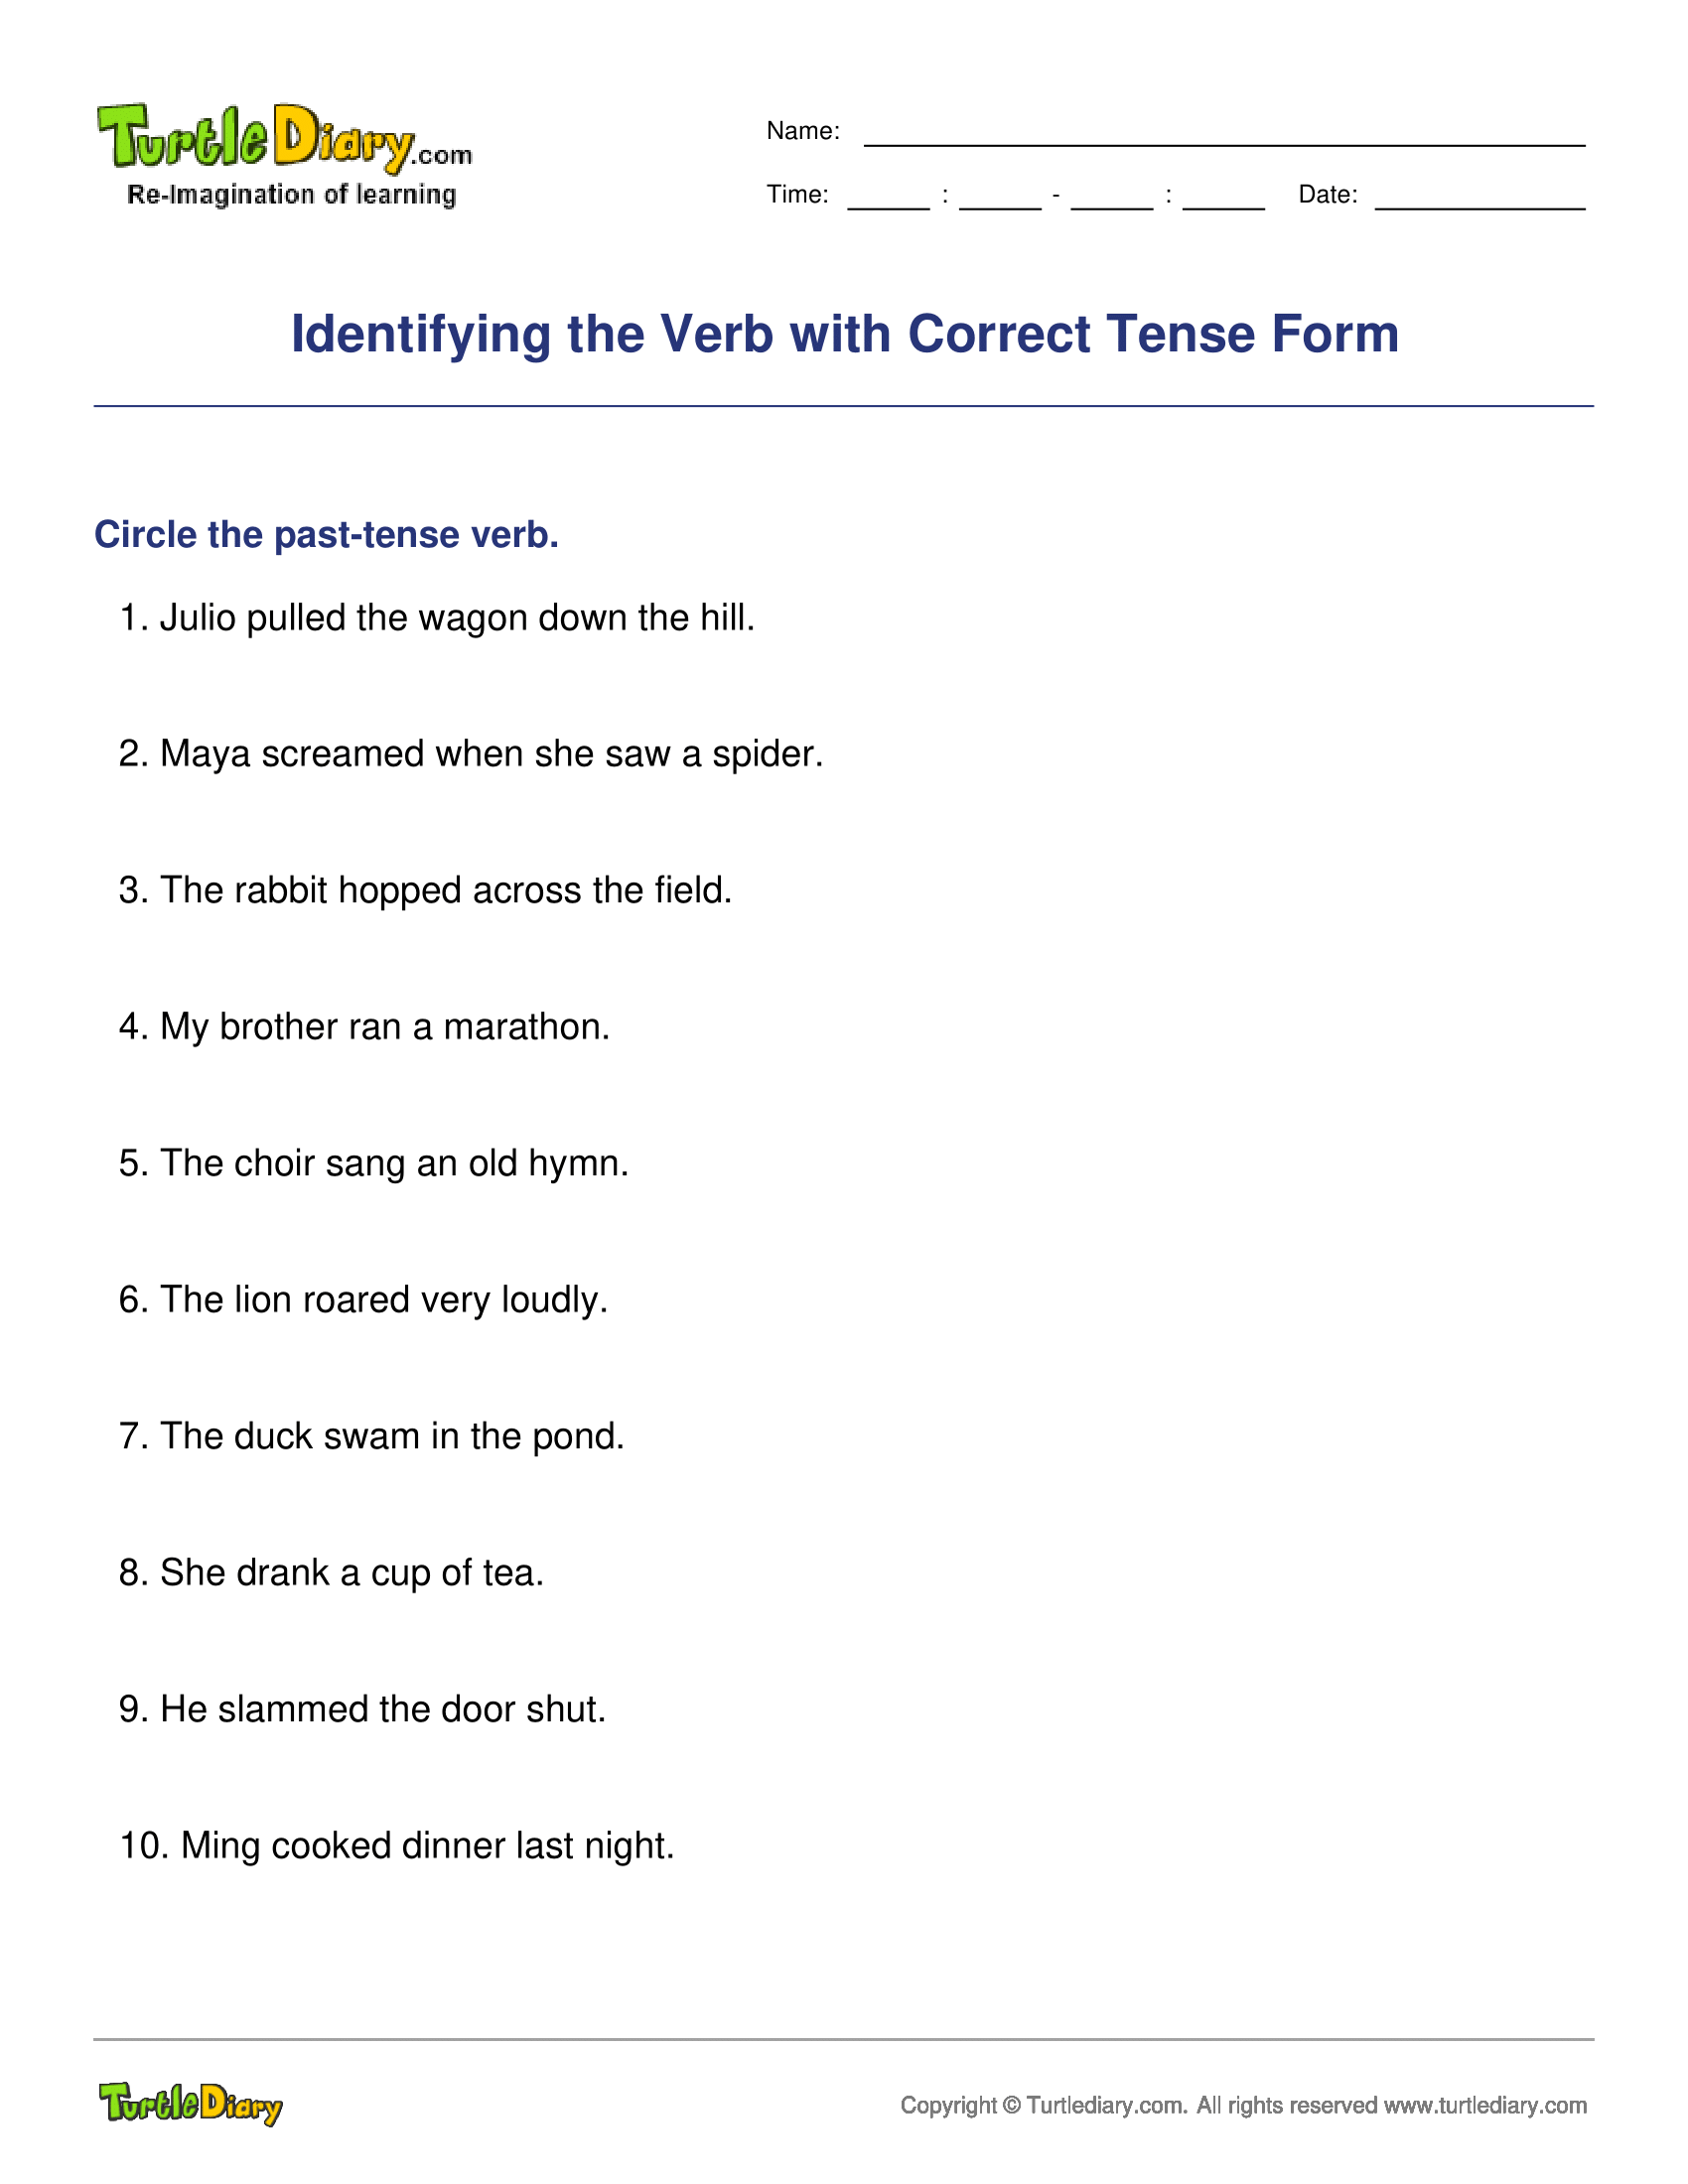 Identifying the Verb with Correct Tense Form